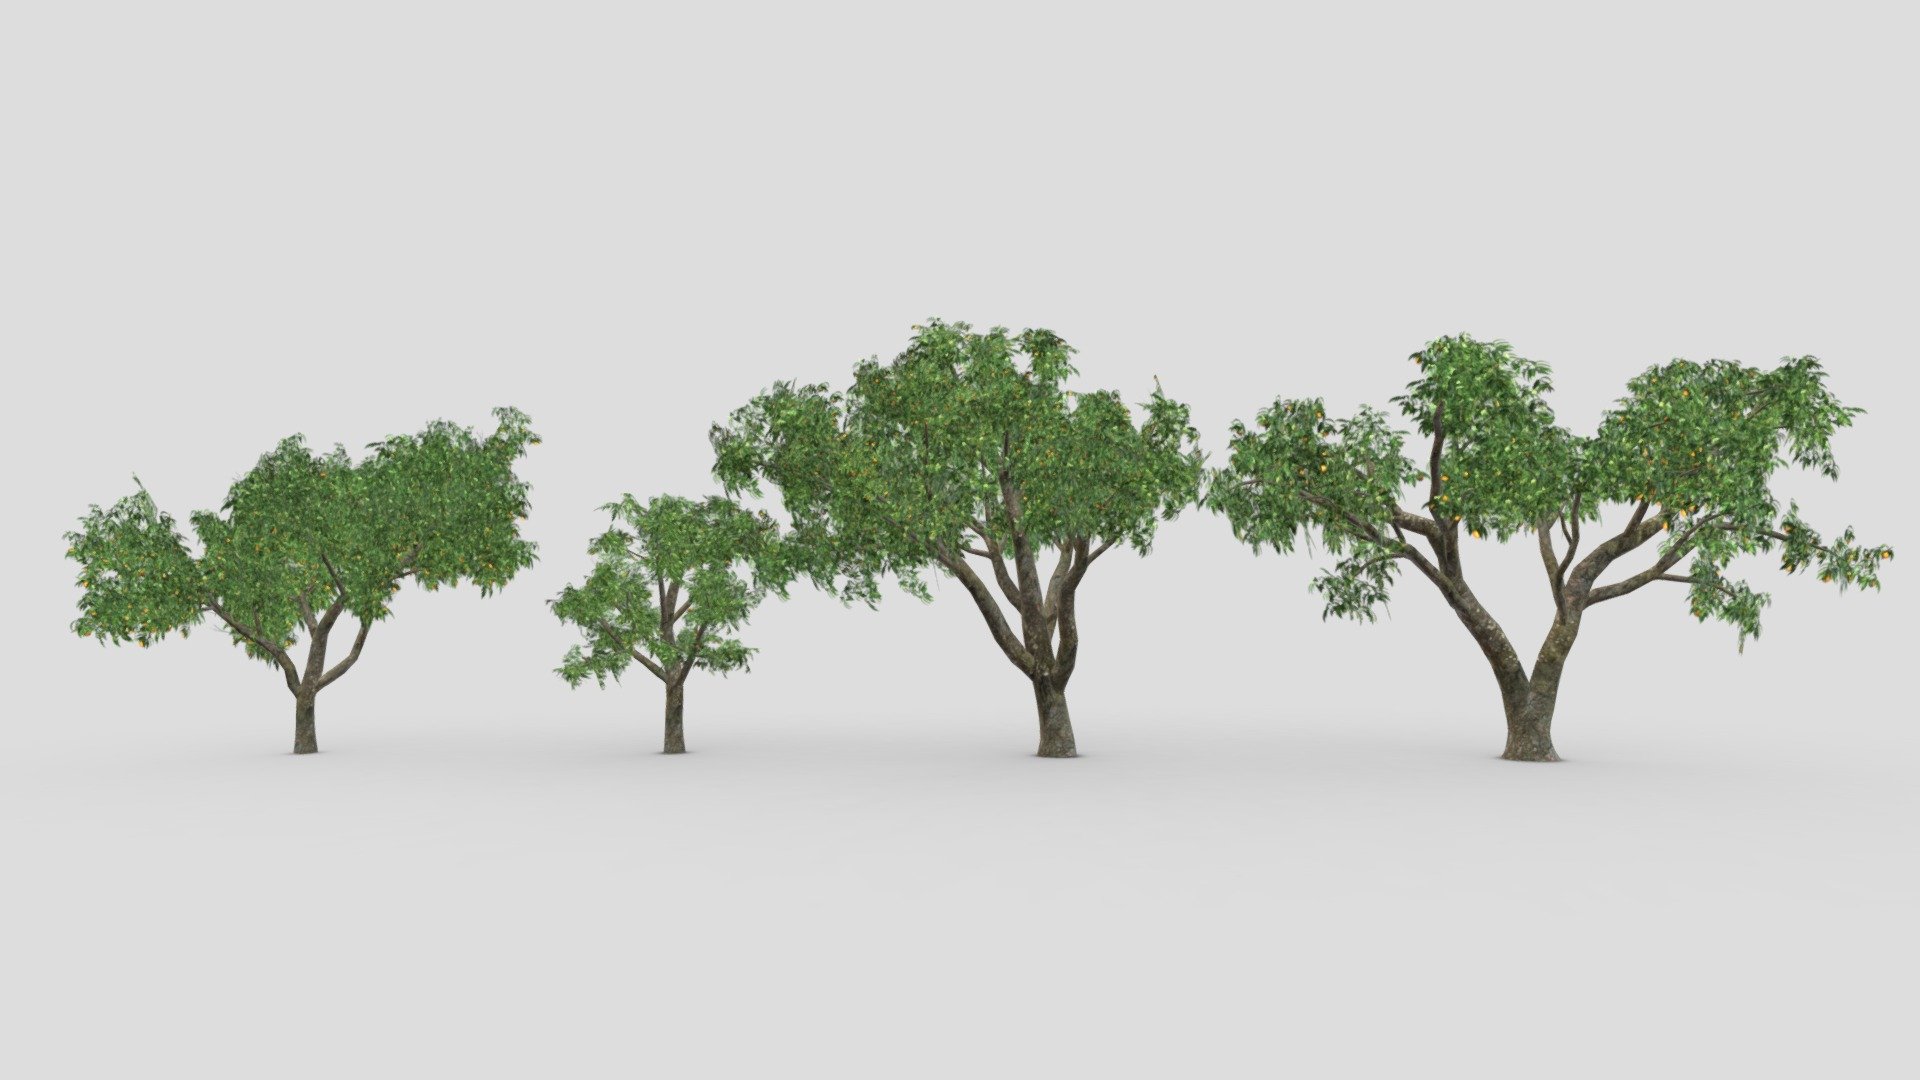 This collection contains 4 3D low-poly poly models of Orange Tree. You can use these models in your projects 3d model